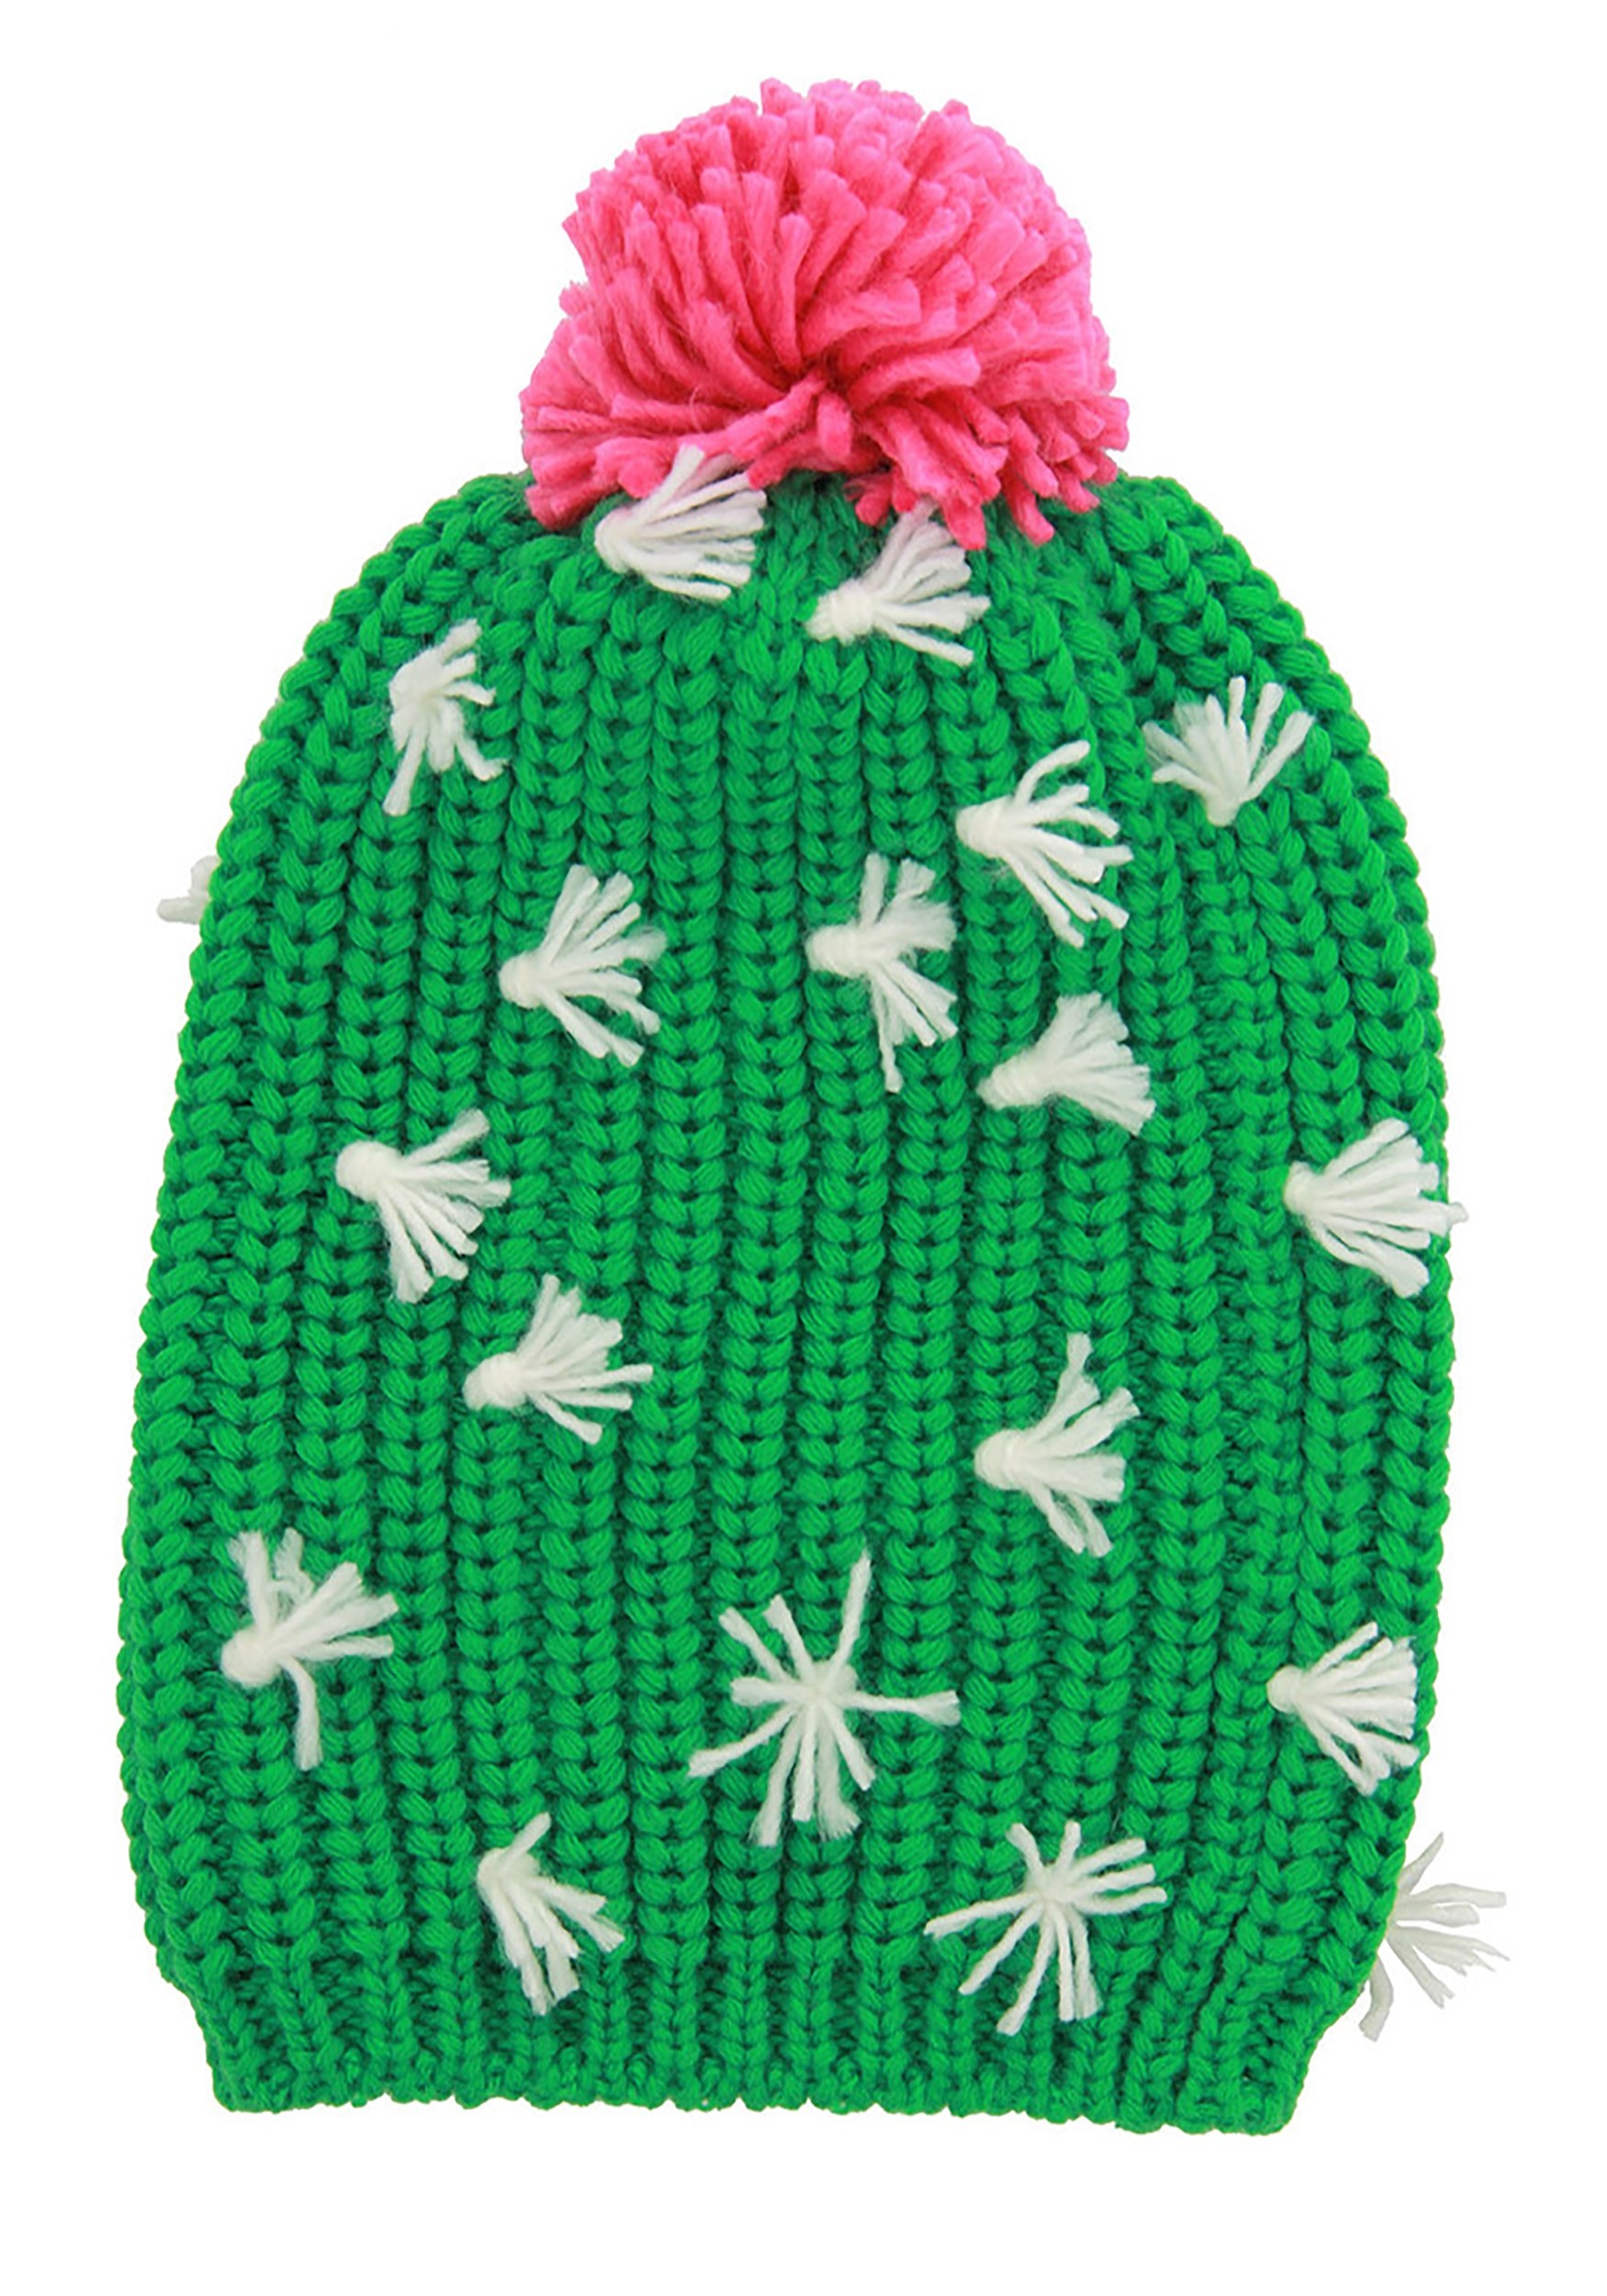 Adult Knit Cactus Slouch Beanie , Adult Beanie